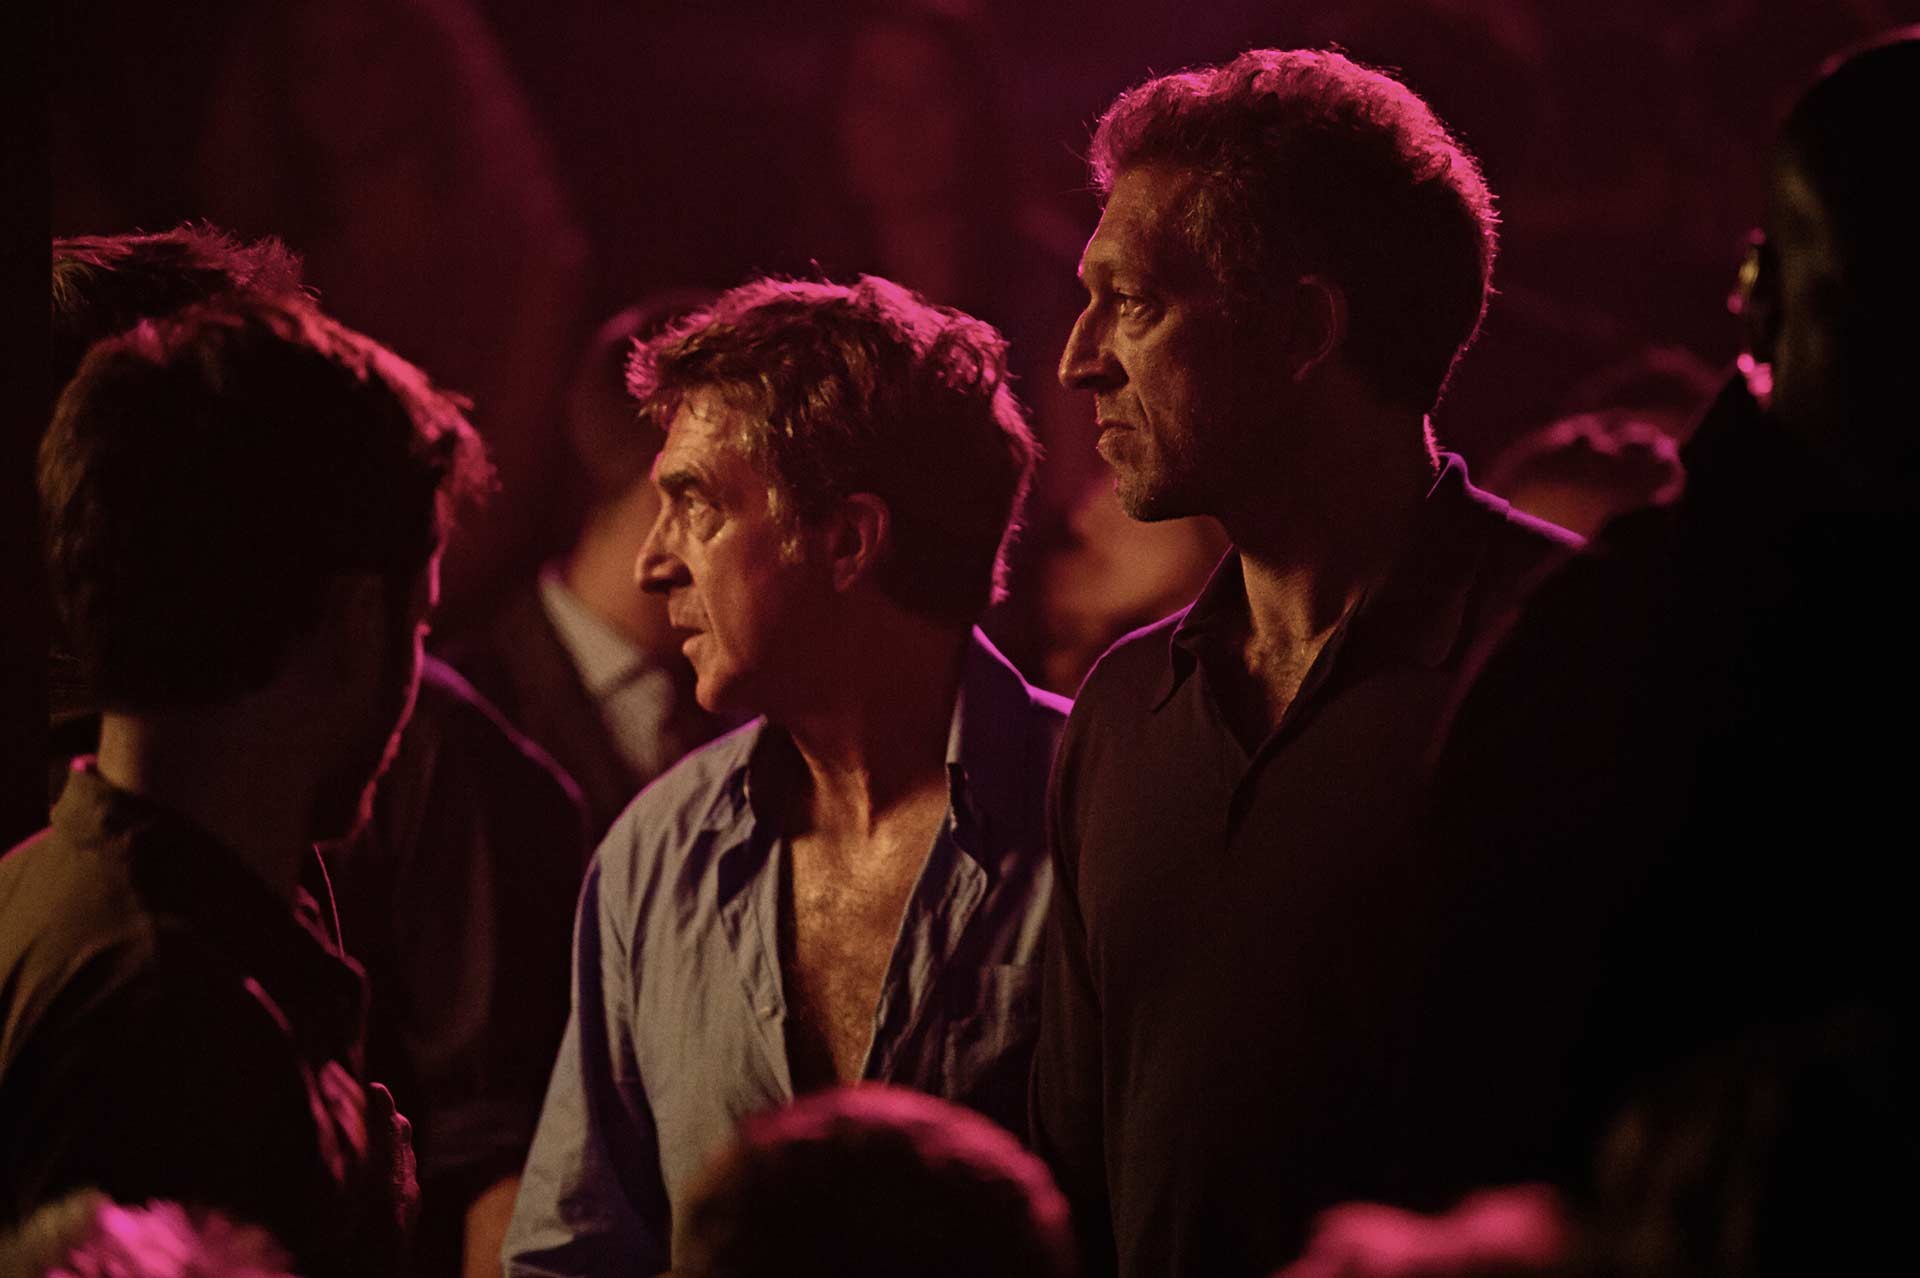 Francois Cluzet stars as Antoine and Vincent Cassel stars as Laurent in Mars Distribution's One Wild Moment (2015)